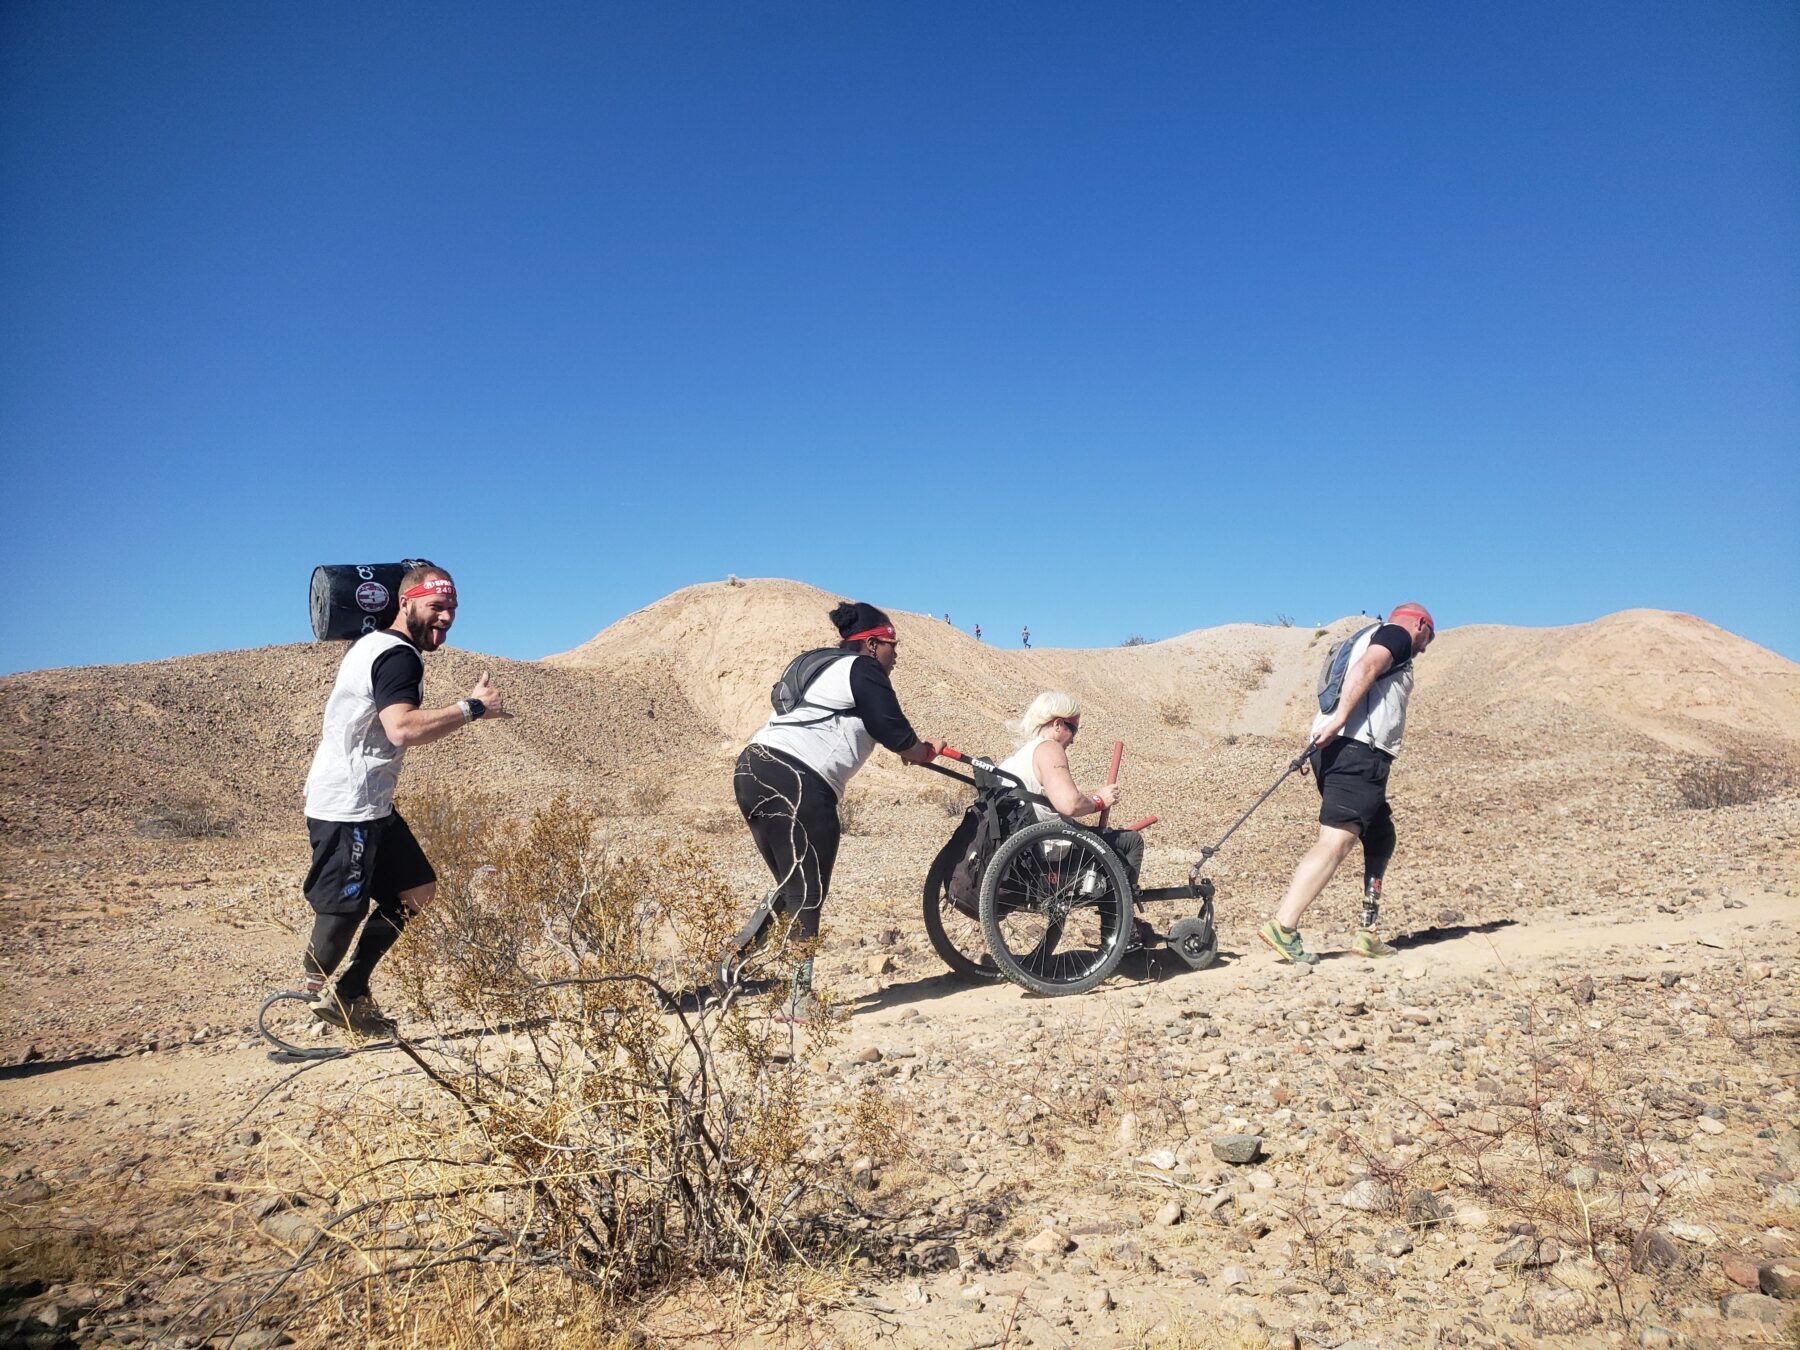 Three people walk alongside a fourth person in a wheelchair on a desert trail among dunes.